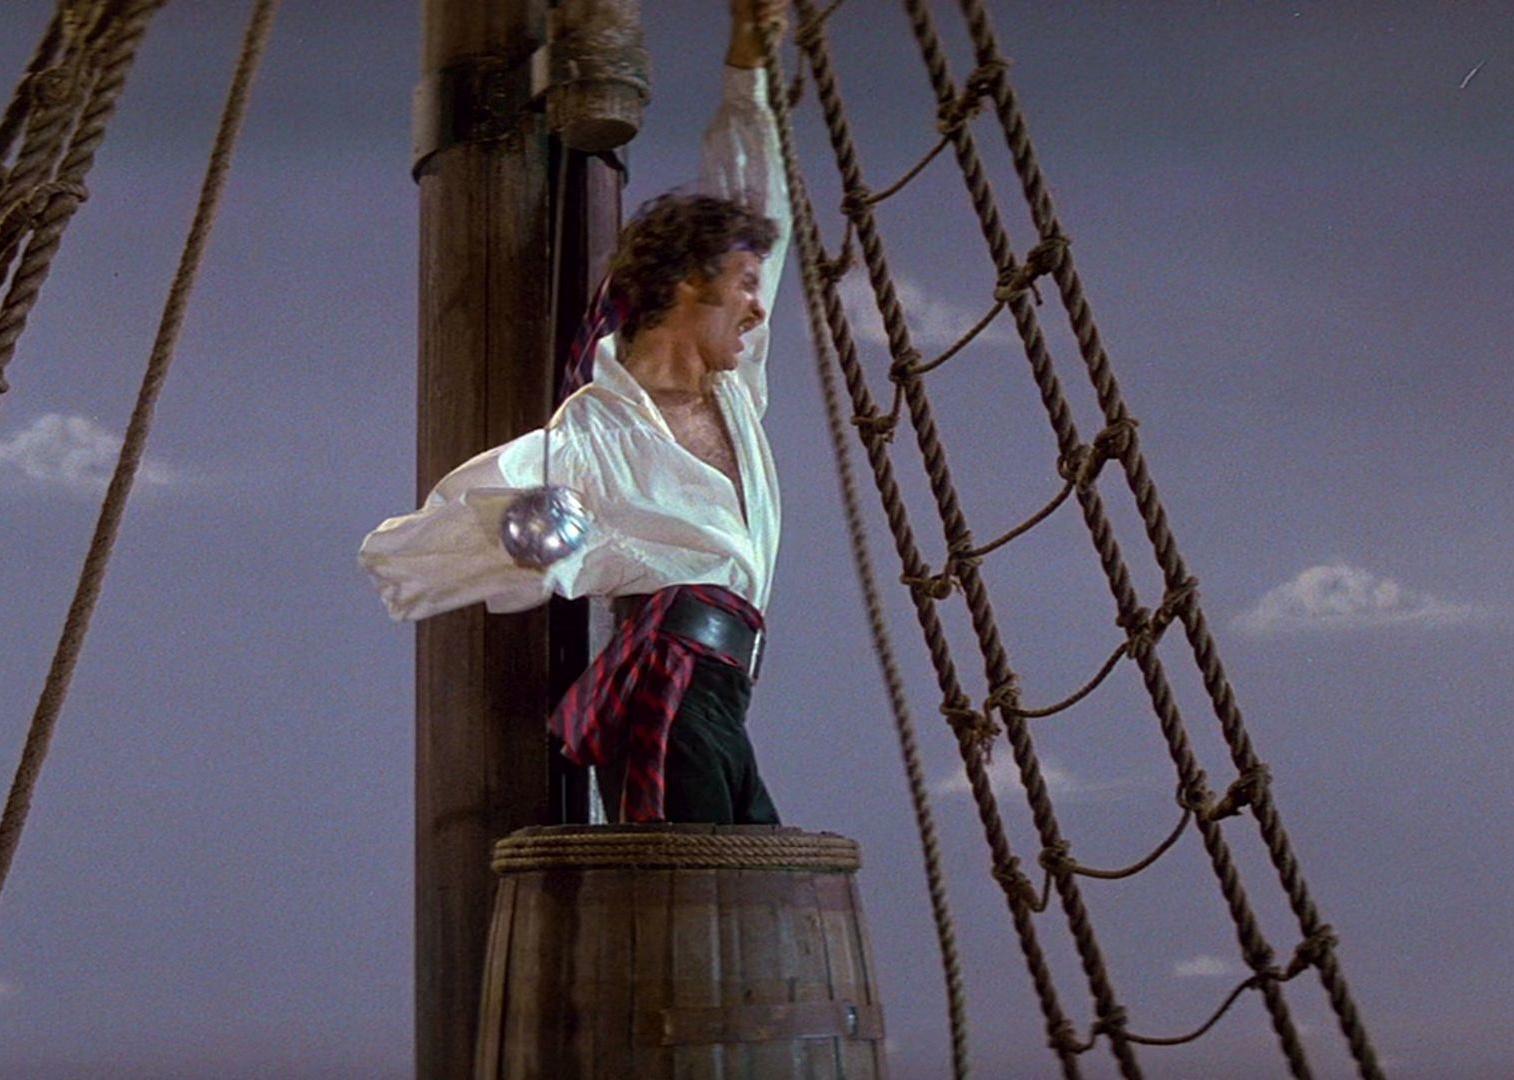 Kevin Kline as a pirate on a ship with a sword.